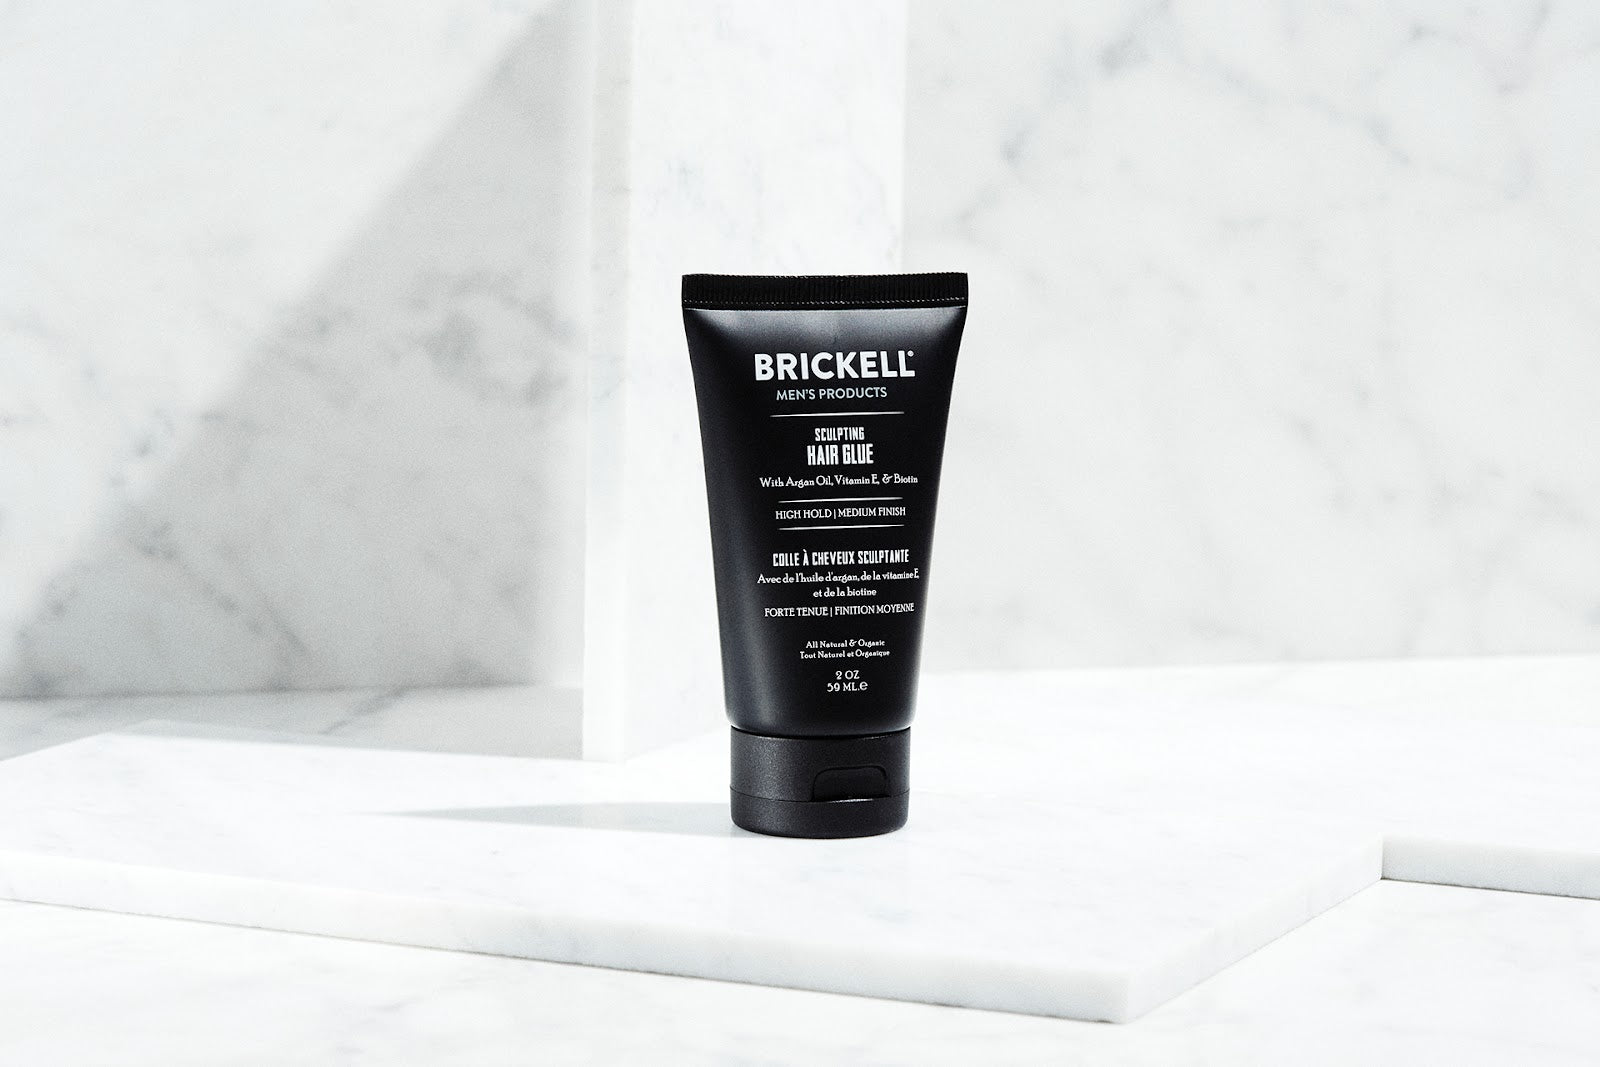 Hair Gel vs. Hair Glue - What's the Difference? – Brickell Men's Products®